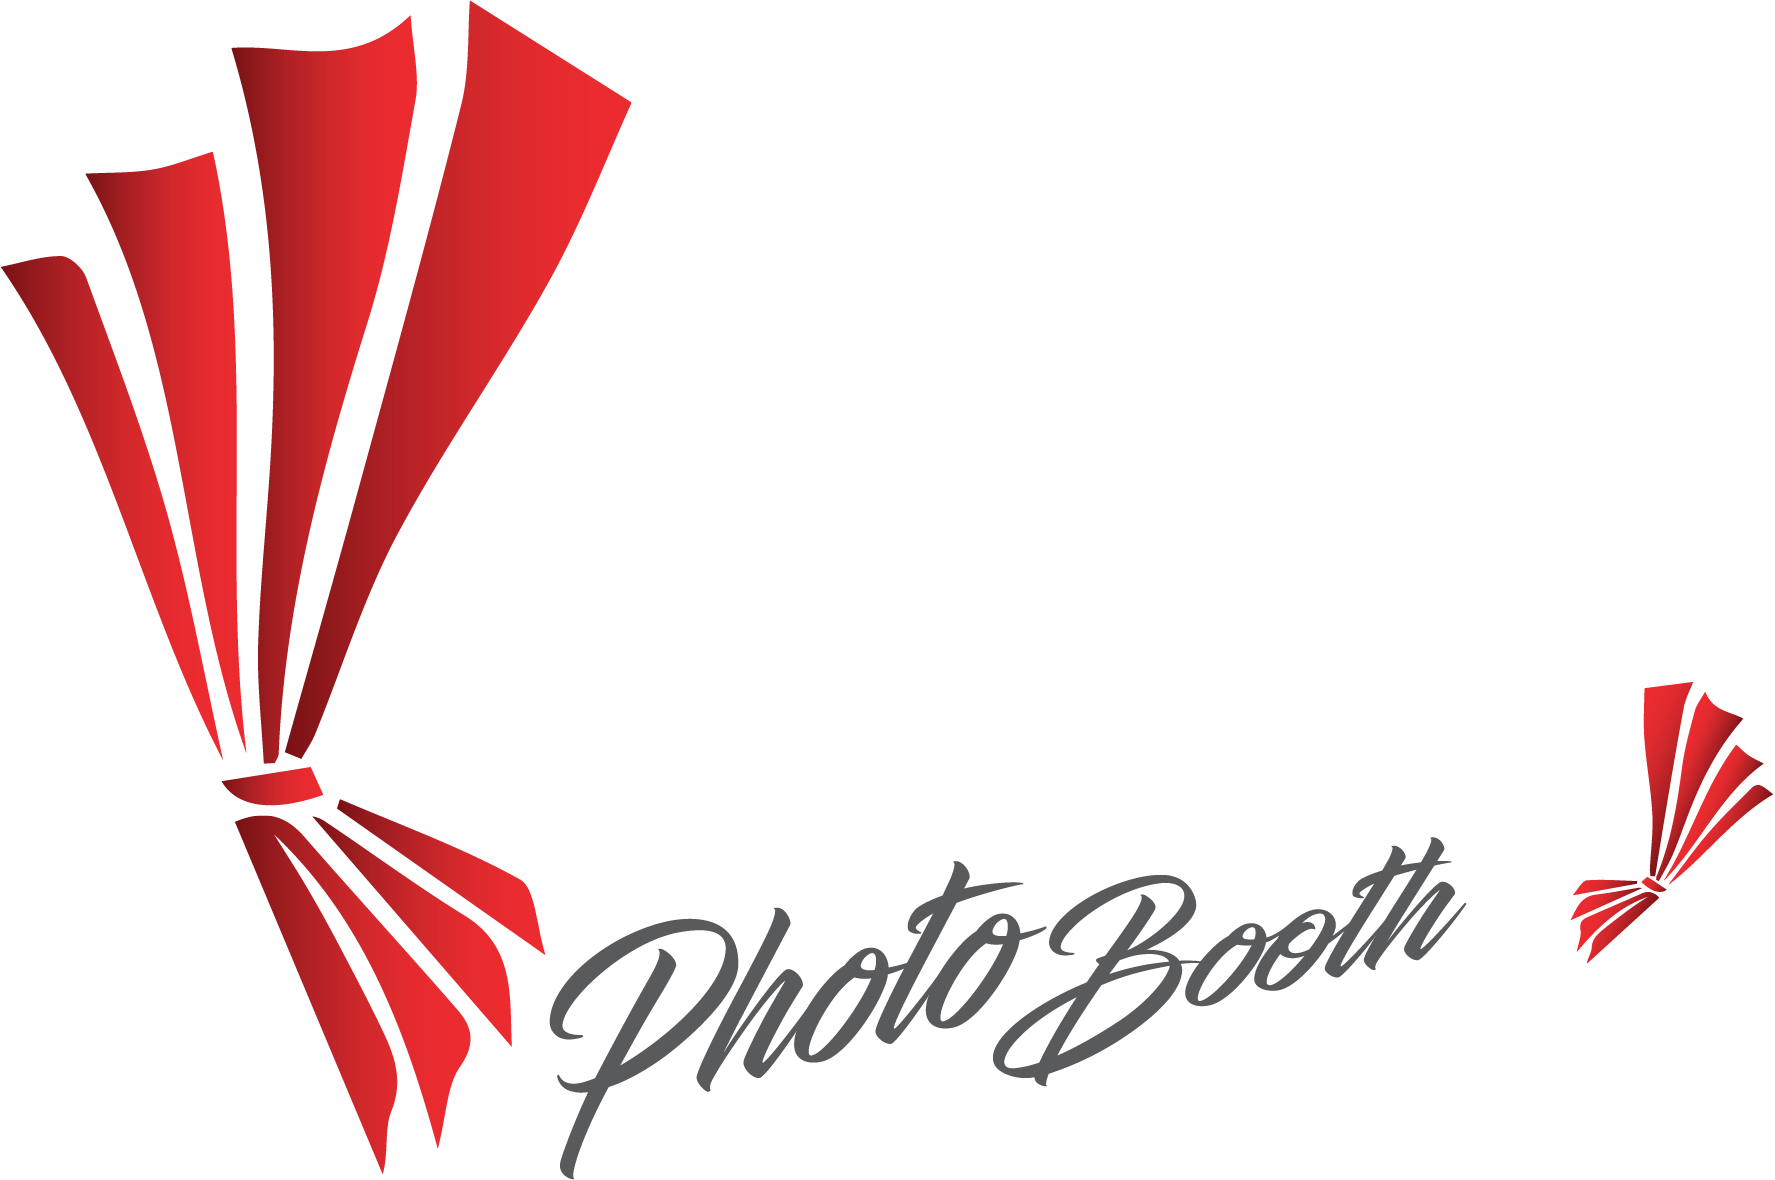 Priceless Moments Photo Booth